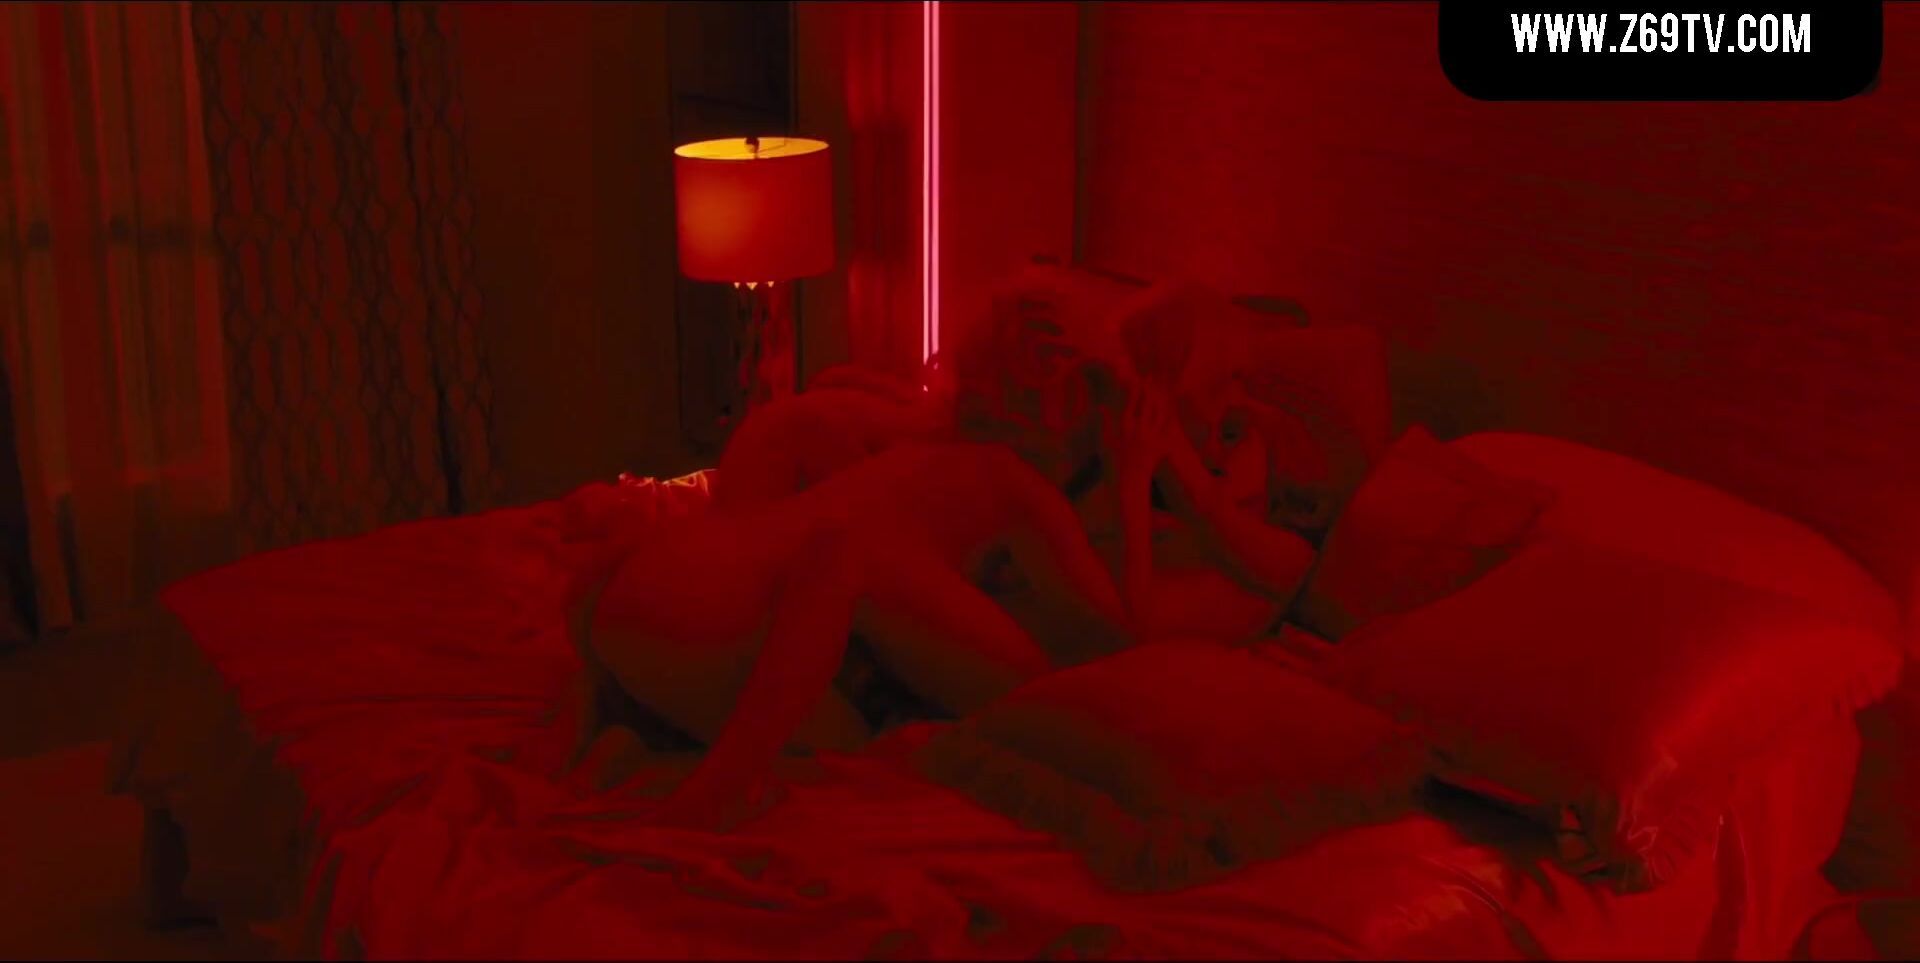 Cam Girl Jett from self-titled TV series watches three blondes having lesbian sex in bed Perverted